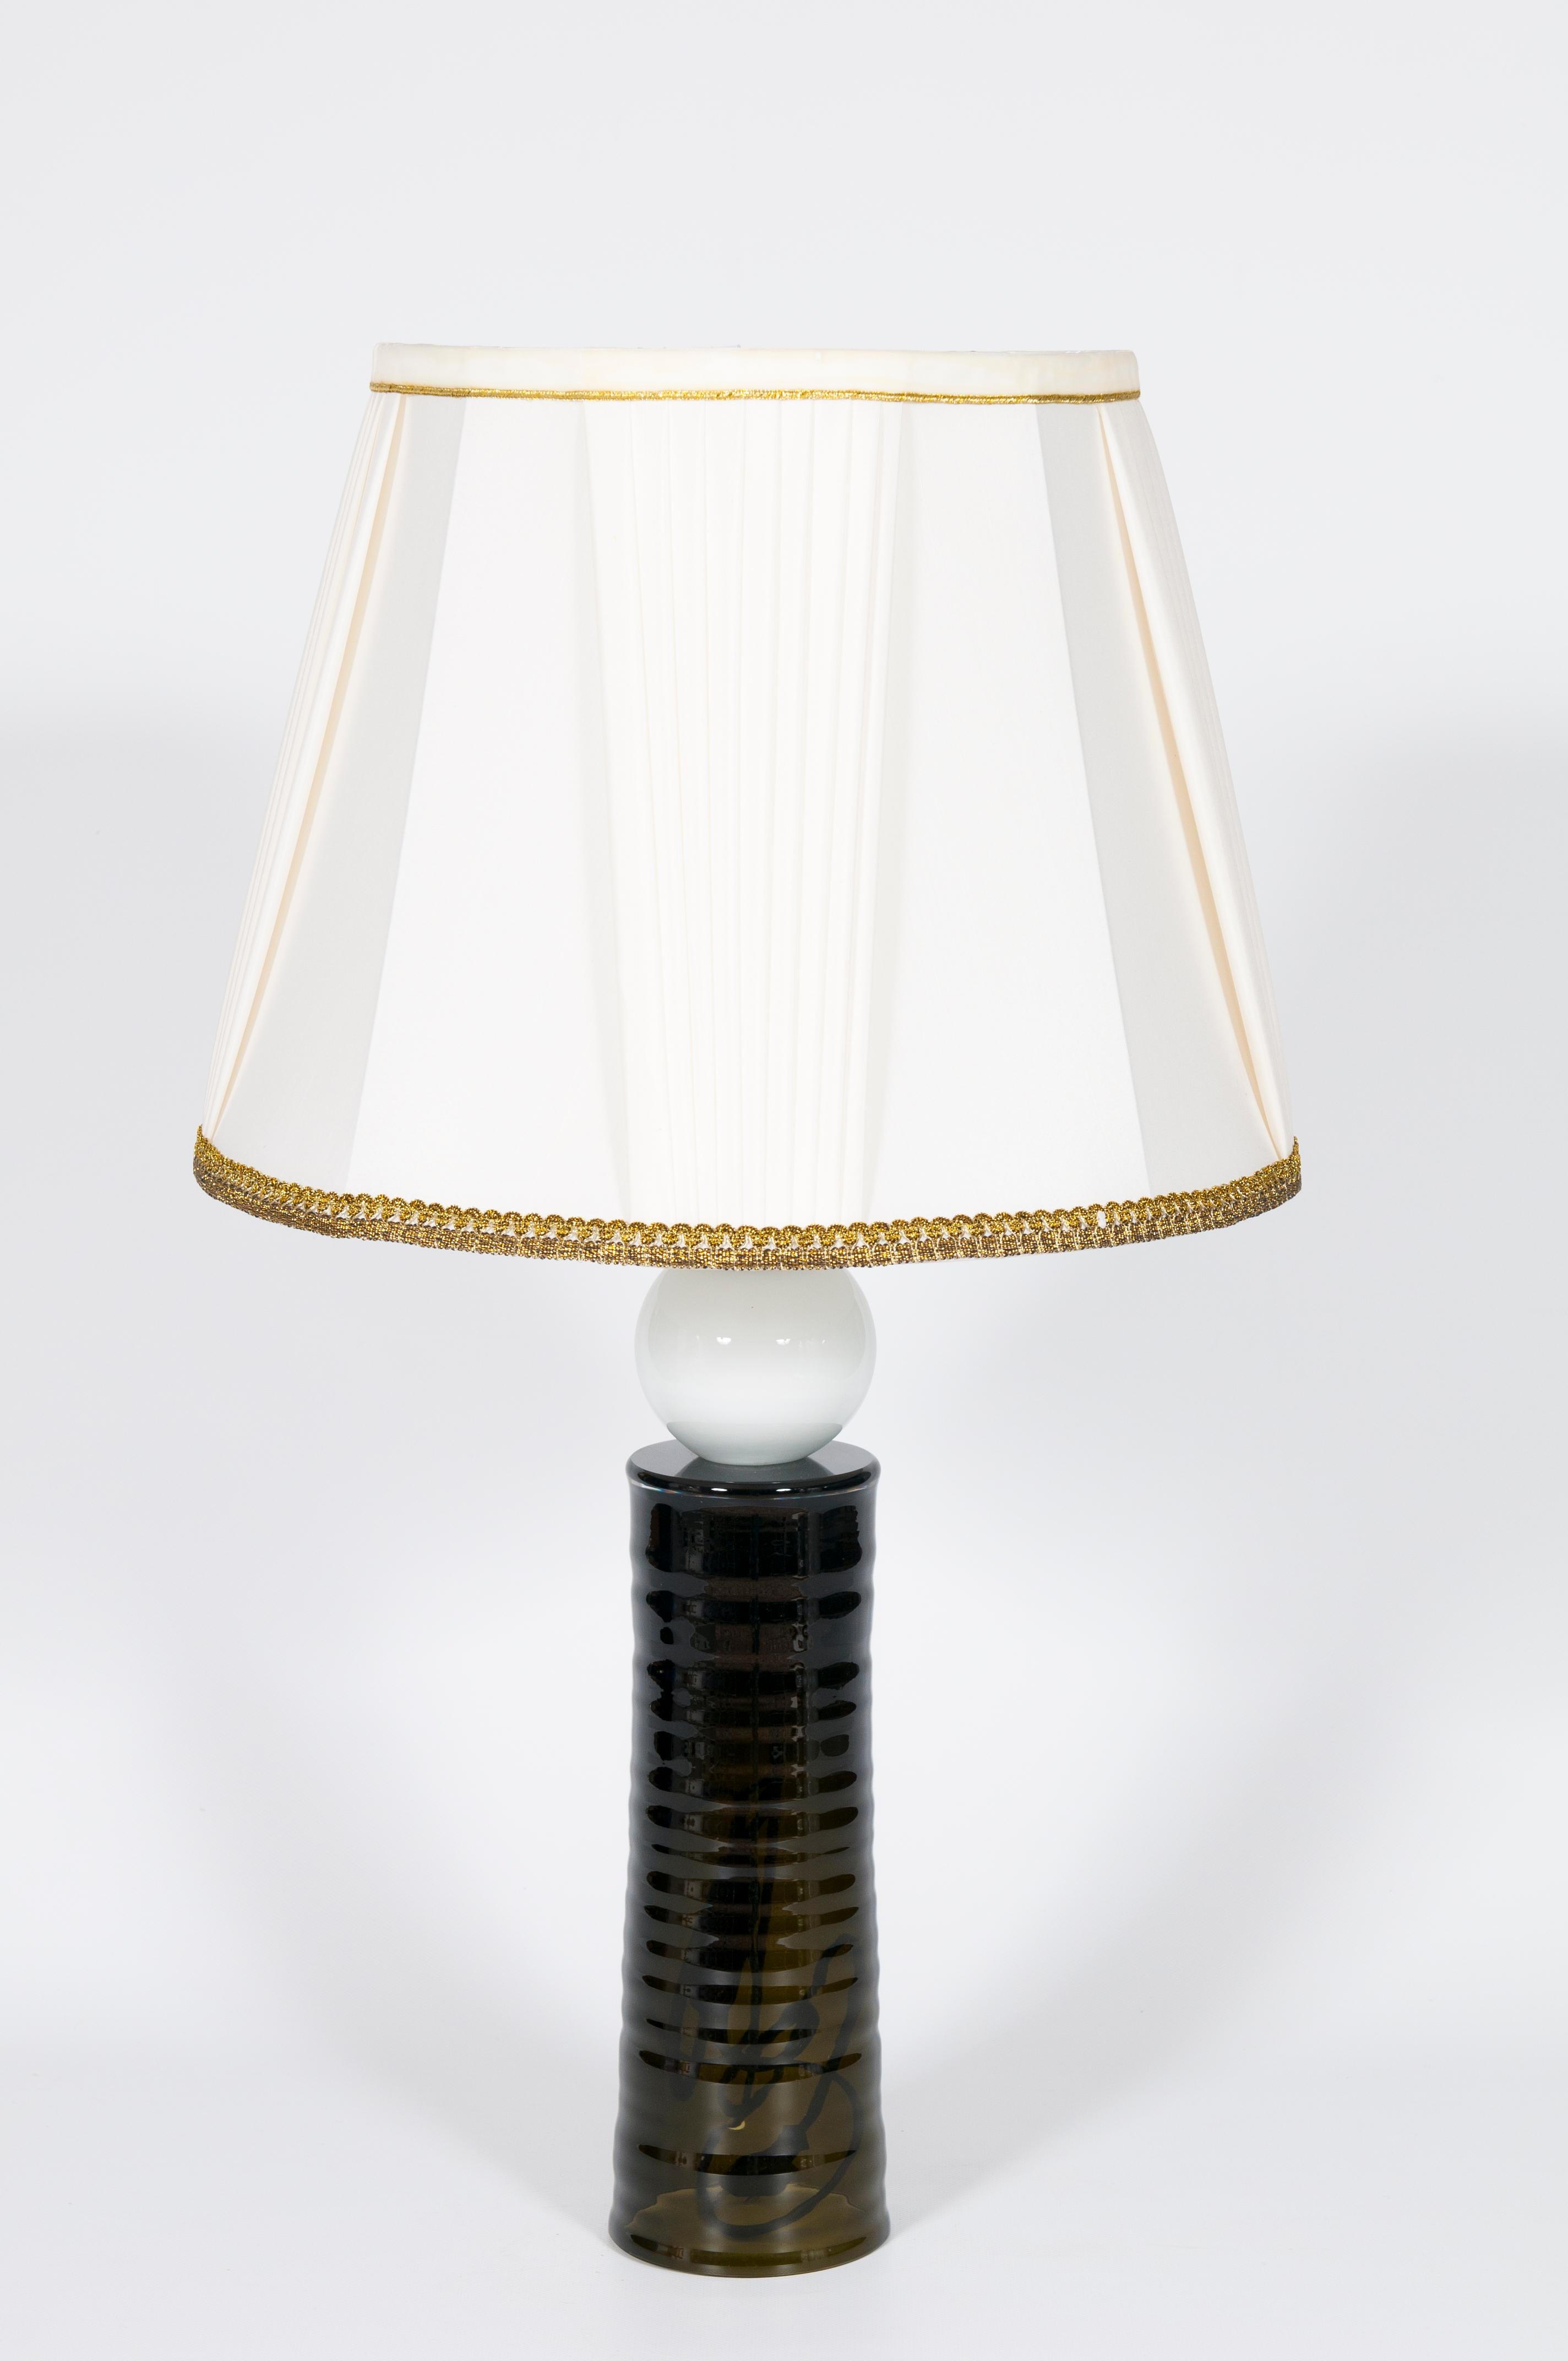 Contemporary Italian table lamp in blown Murano glass black and white, by Giovanni Dalla Fina.
This elegant table lamp is composed of a single piece black column, with some circular and soft-looking corrugations that run all around the body, with a